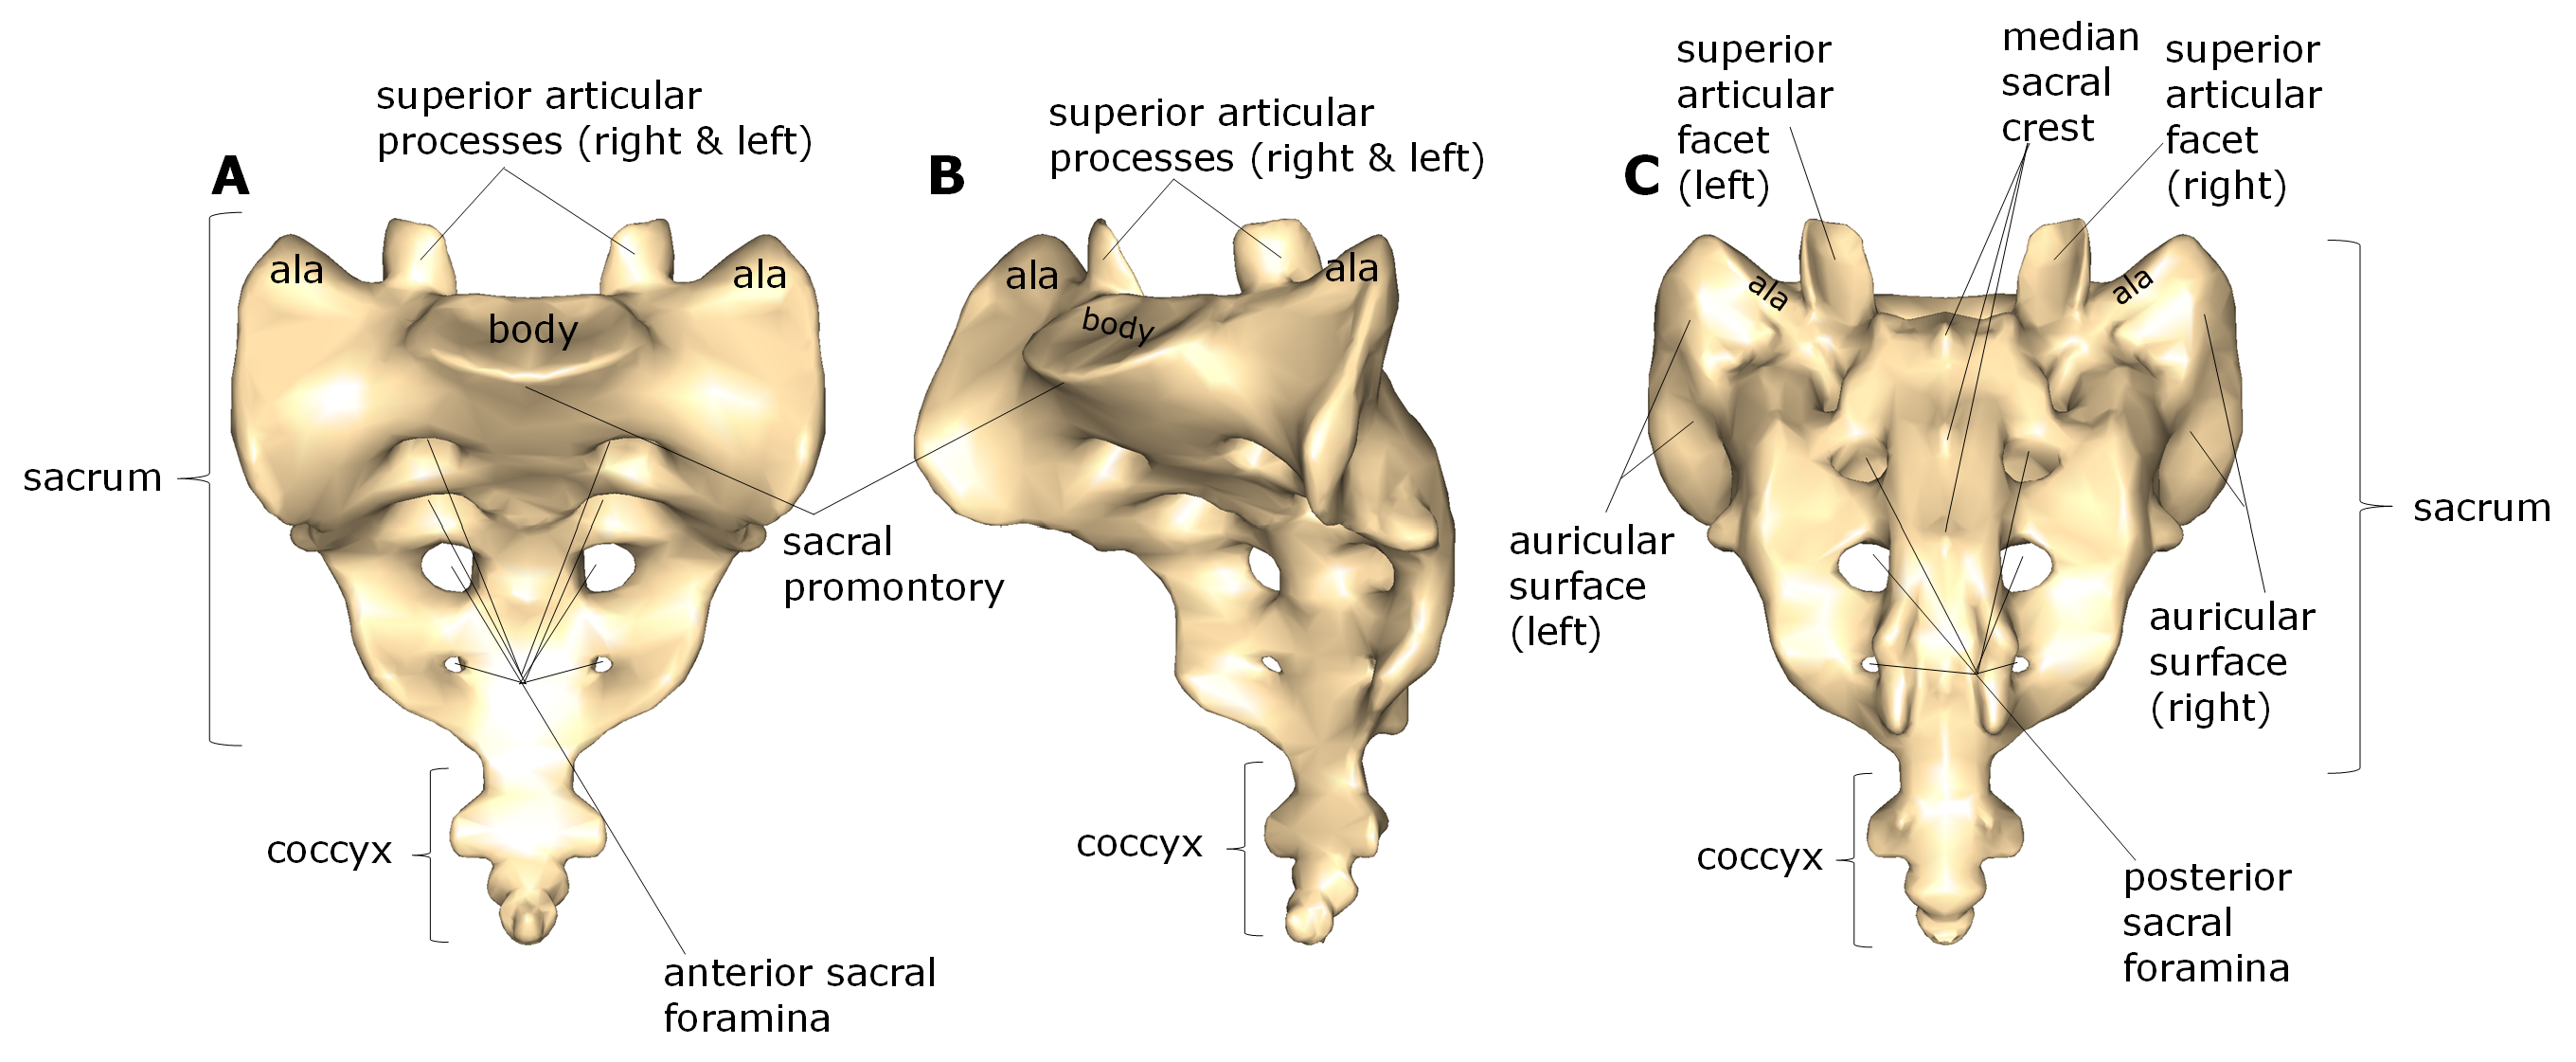 Diagram of the sacrum and coccyx